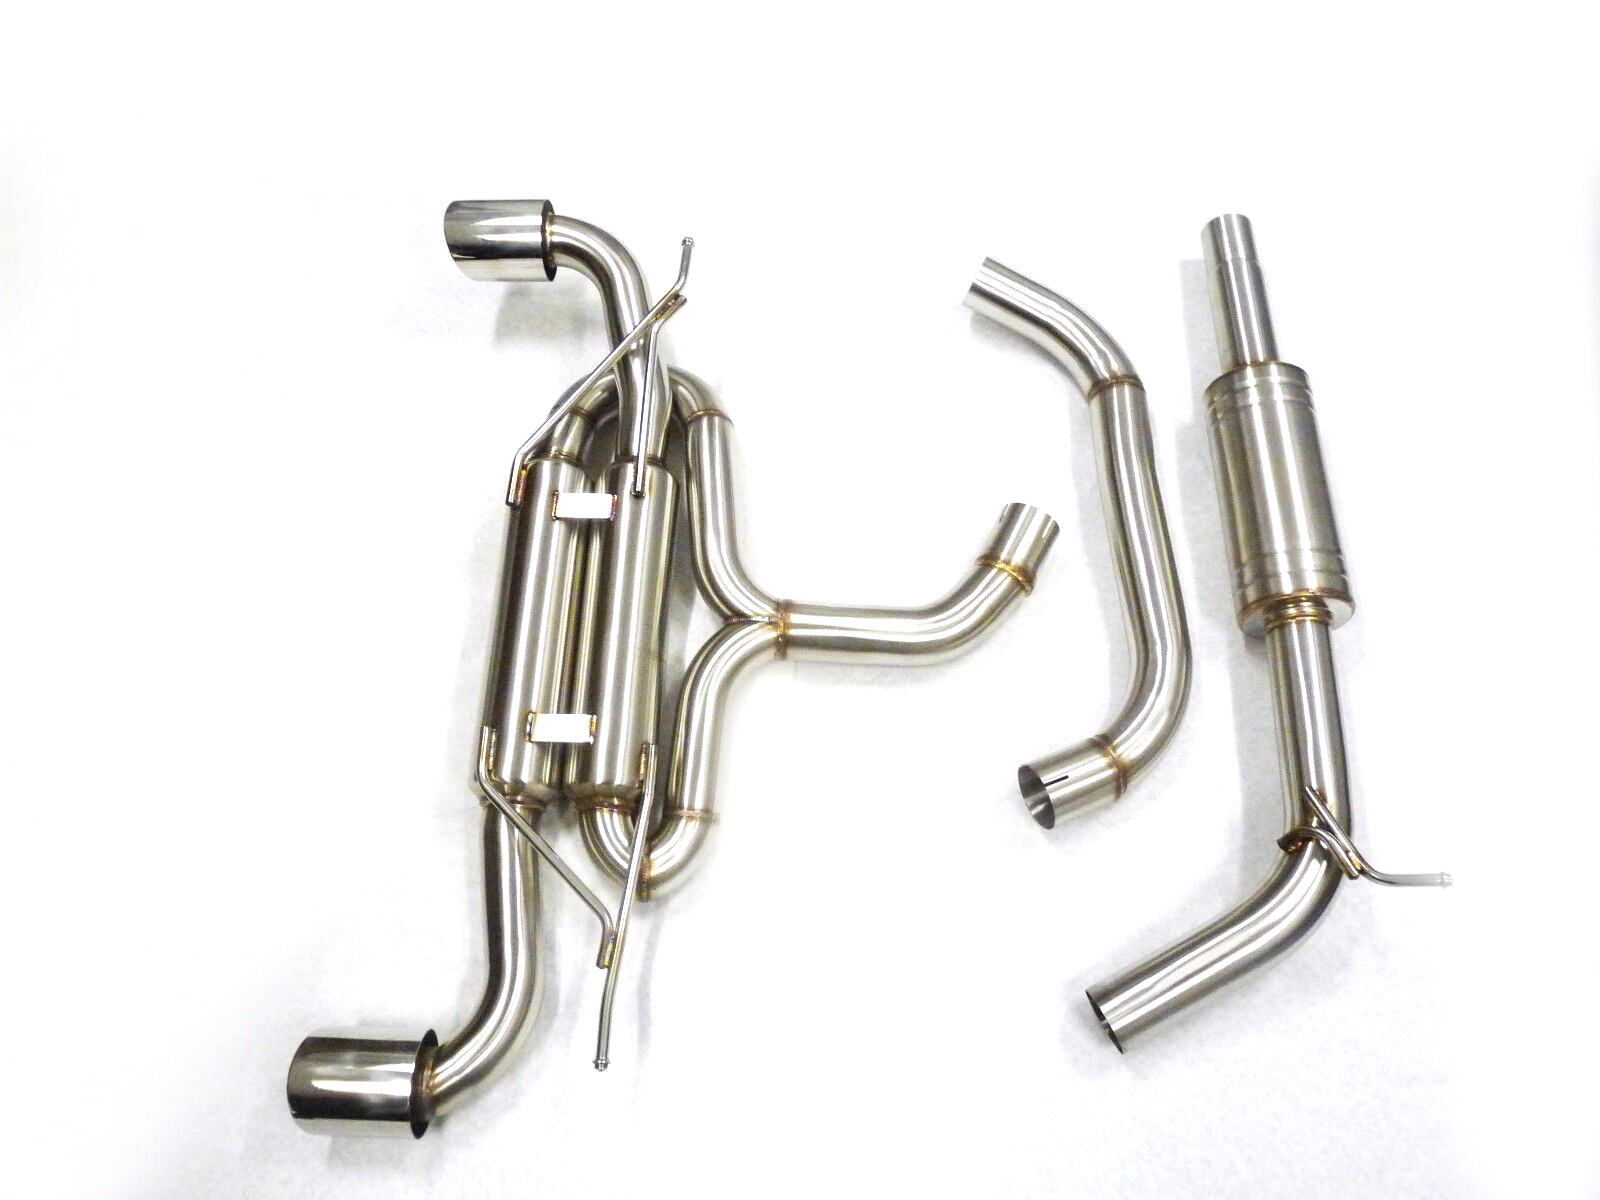 Becker  Stainless Catback Exhaust For 2015+ VW GTI MK7 2.0L